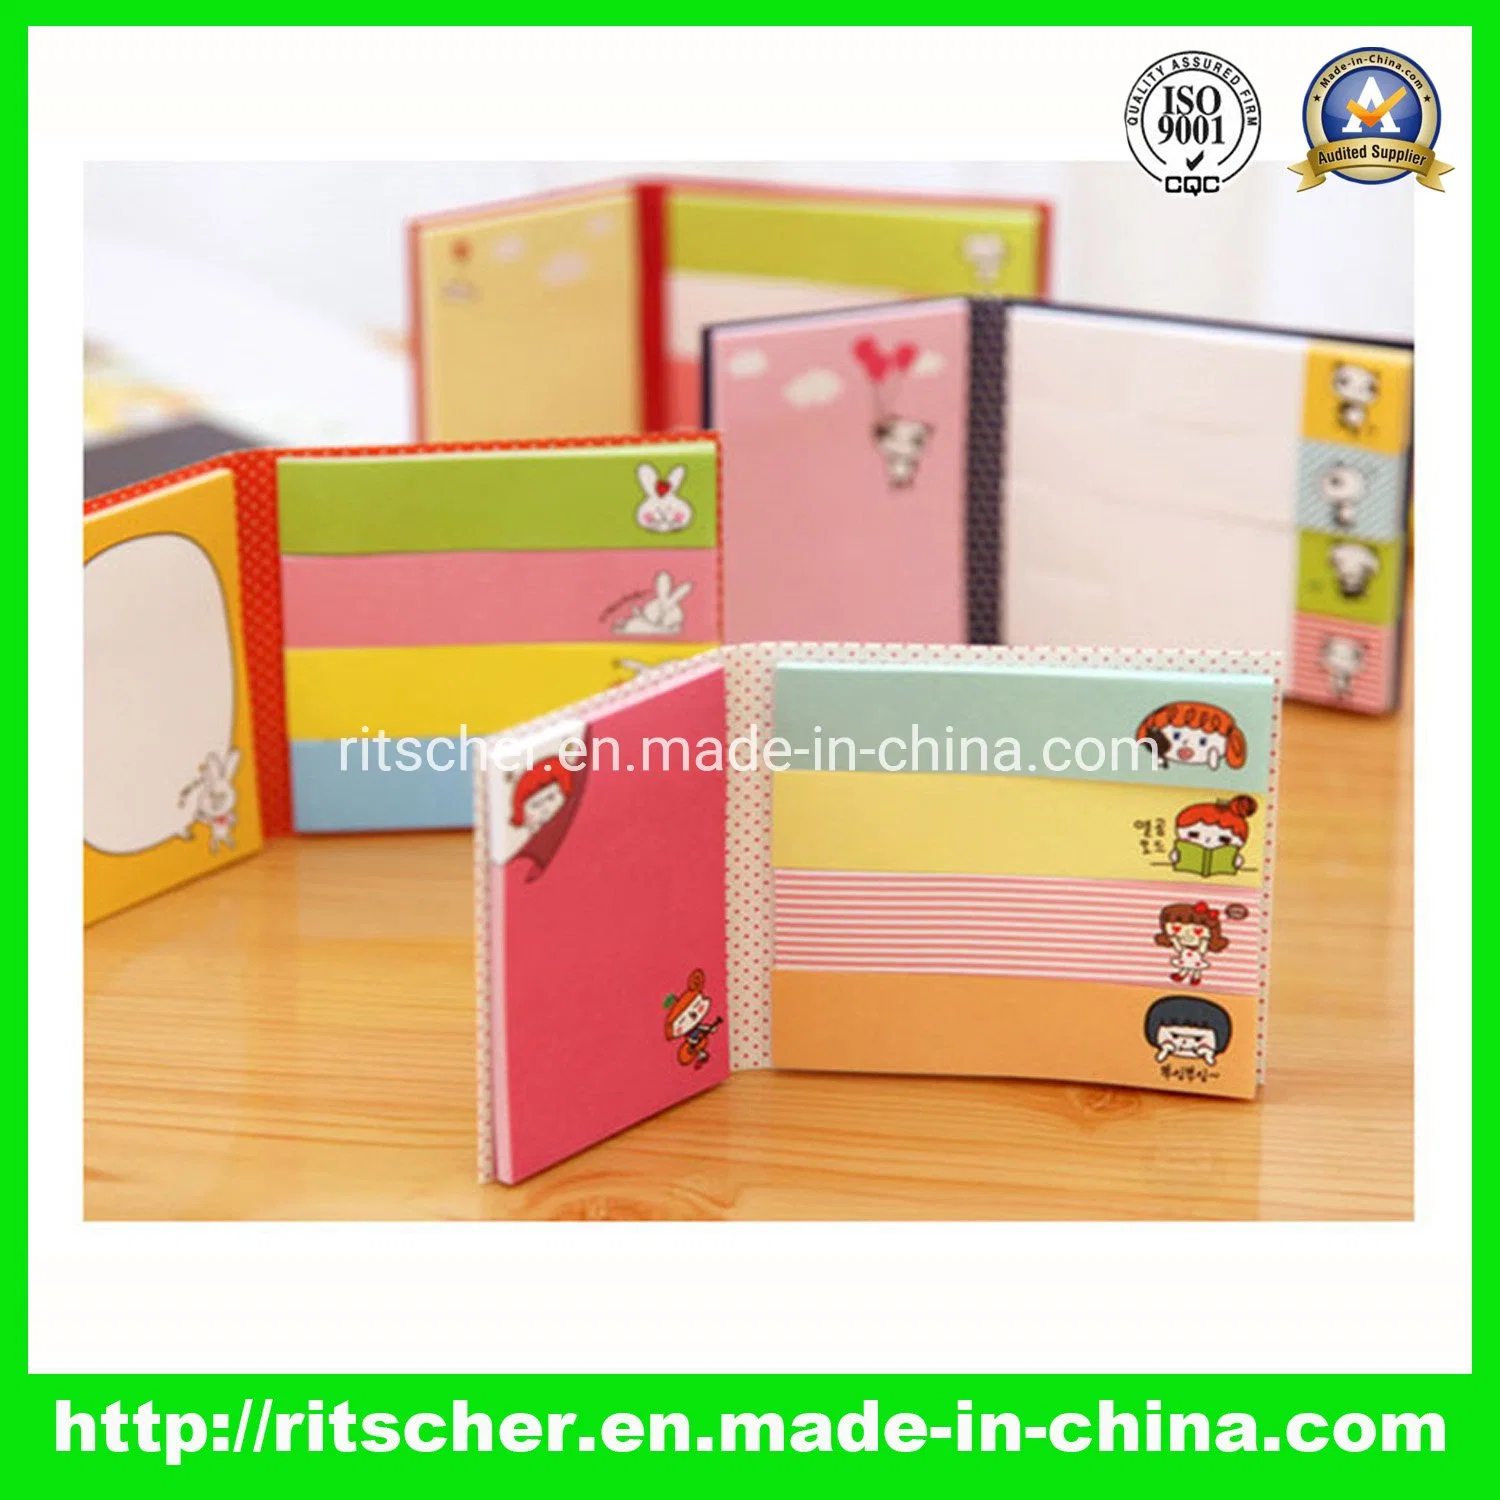 High quality/High cost performance  Book of Office/School Supply Certificate